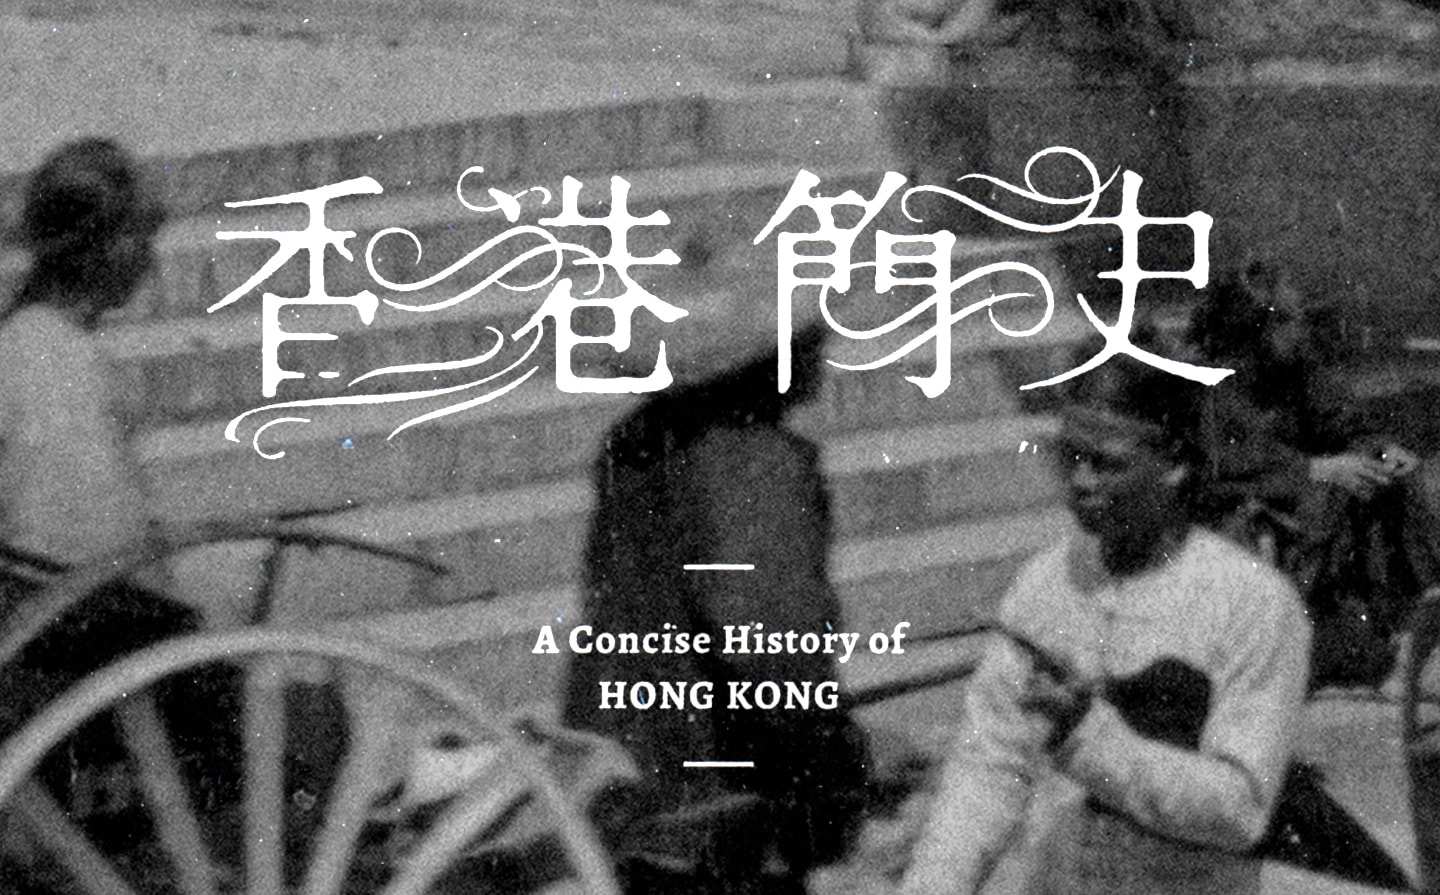 **A Concise History of Hong Kong**   
**香港簡史**
Aug, 2021  
Humming Publishing  

Written by John M. Carroll (高馬可), translate by 林立偉  
Published by Humming Publishing  
HK$128 NT$640 / ISBN 978-988-8562-42-8